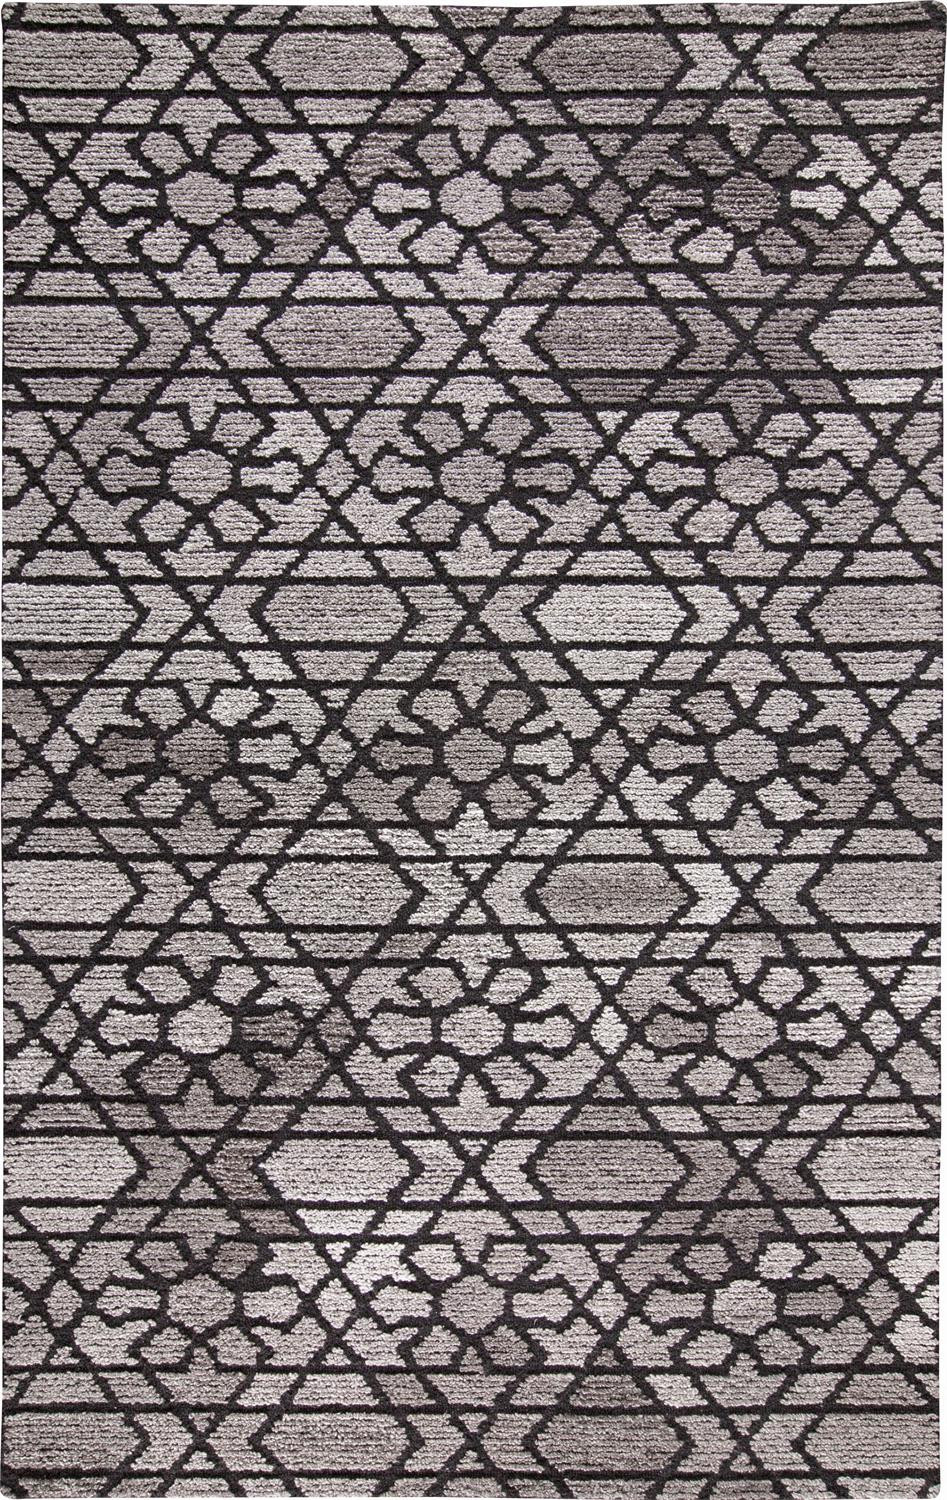 9' X 12' Taupe Black And Gray Wool Paisley Tufted Handmade Area Rug-512007-1